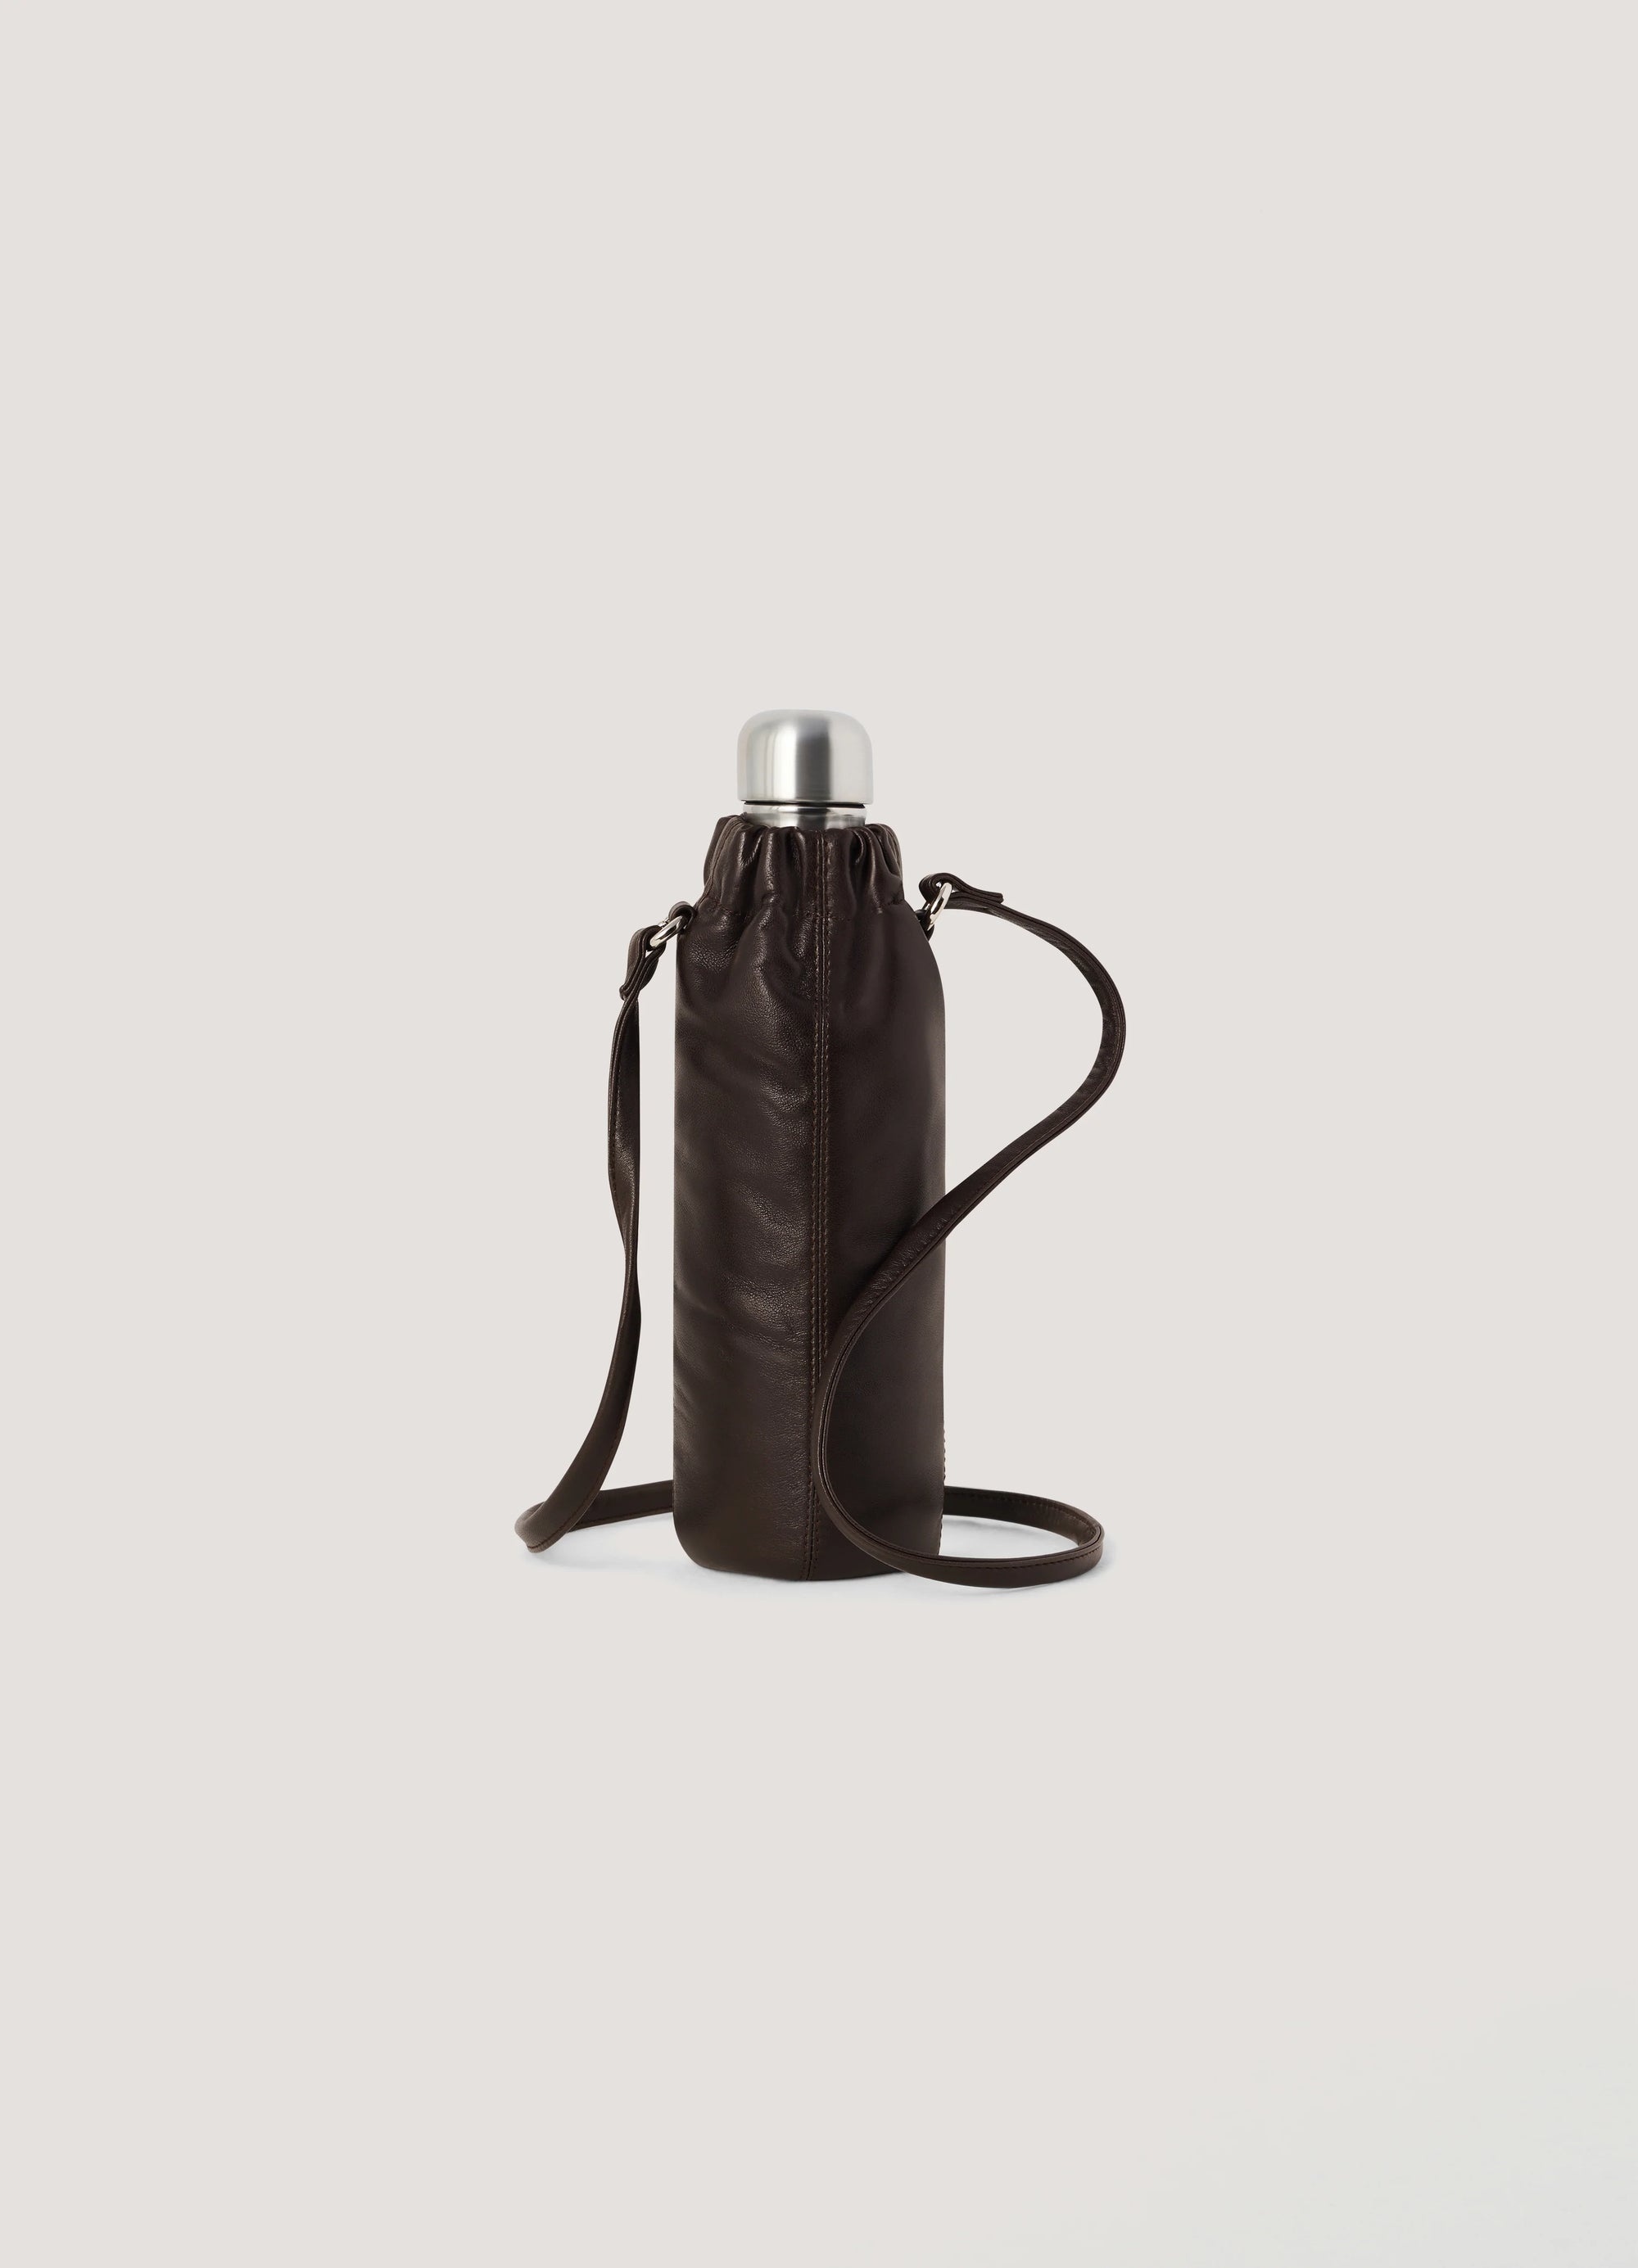 MEDIUM WATER BOTTLE-CARRIER
SOFT NAPPA LEATHER - 1